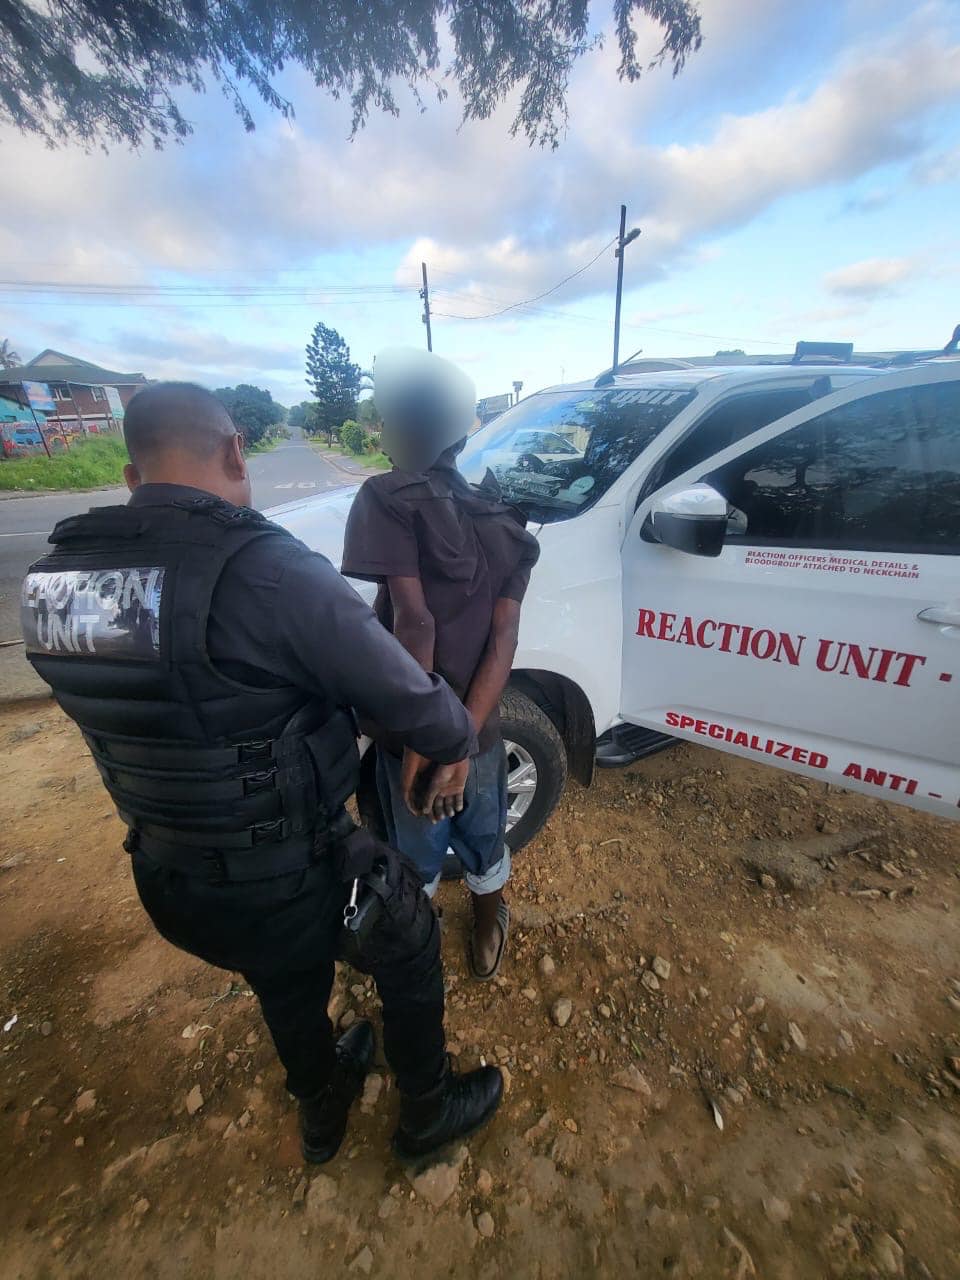 Suspect sought for attempted murder arrested in Verulam